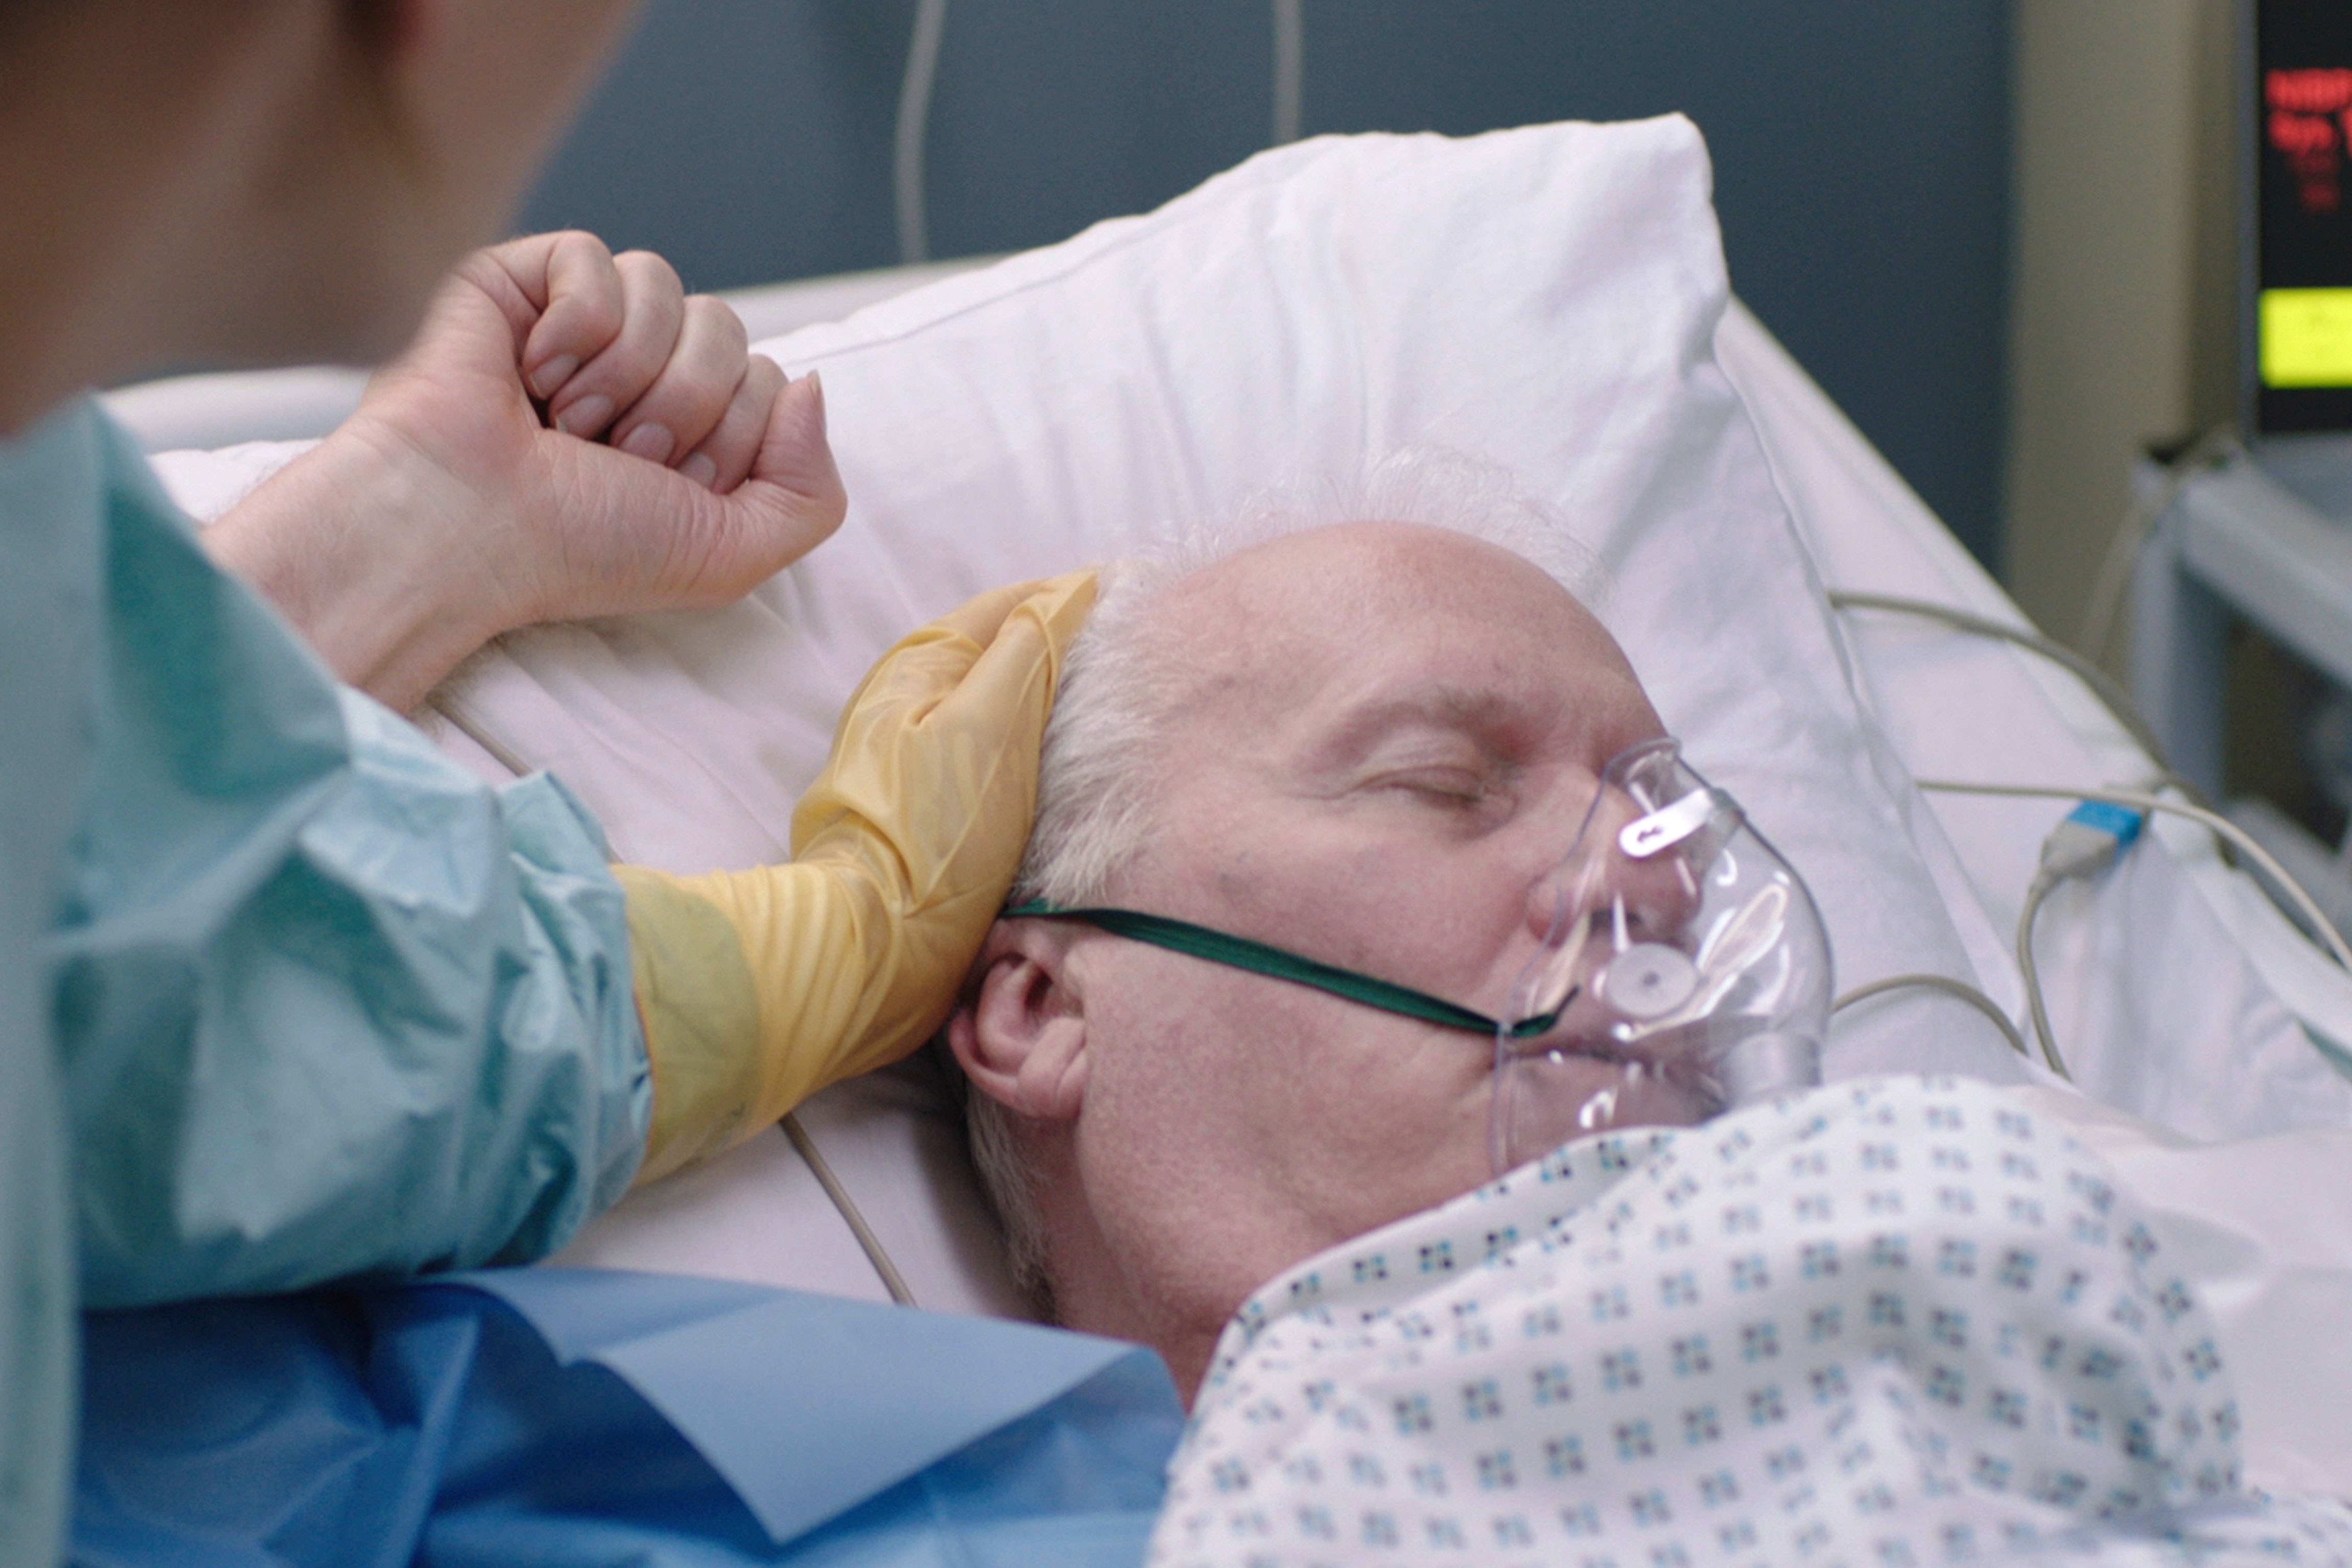 Charlie Fairhead is at death's door in his final Casualty episode. Will he exit Holby ED alive or dead?